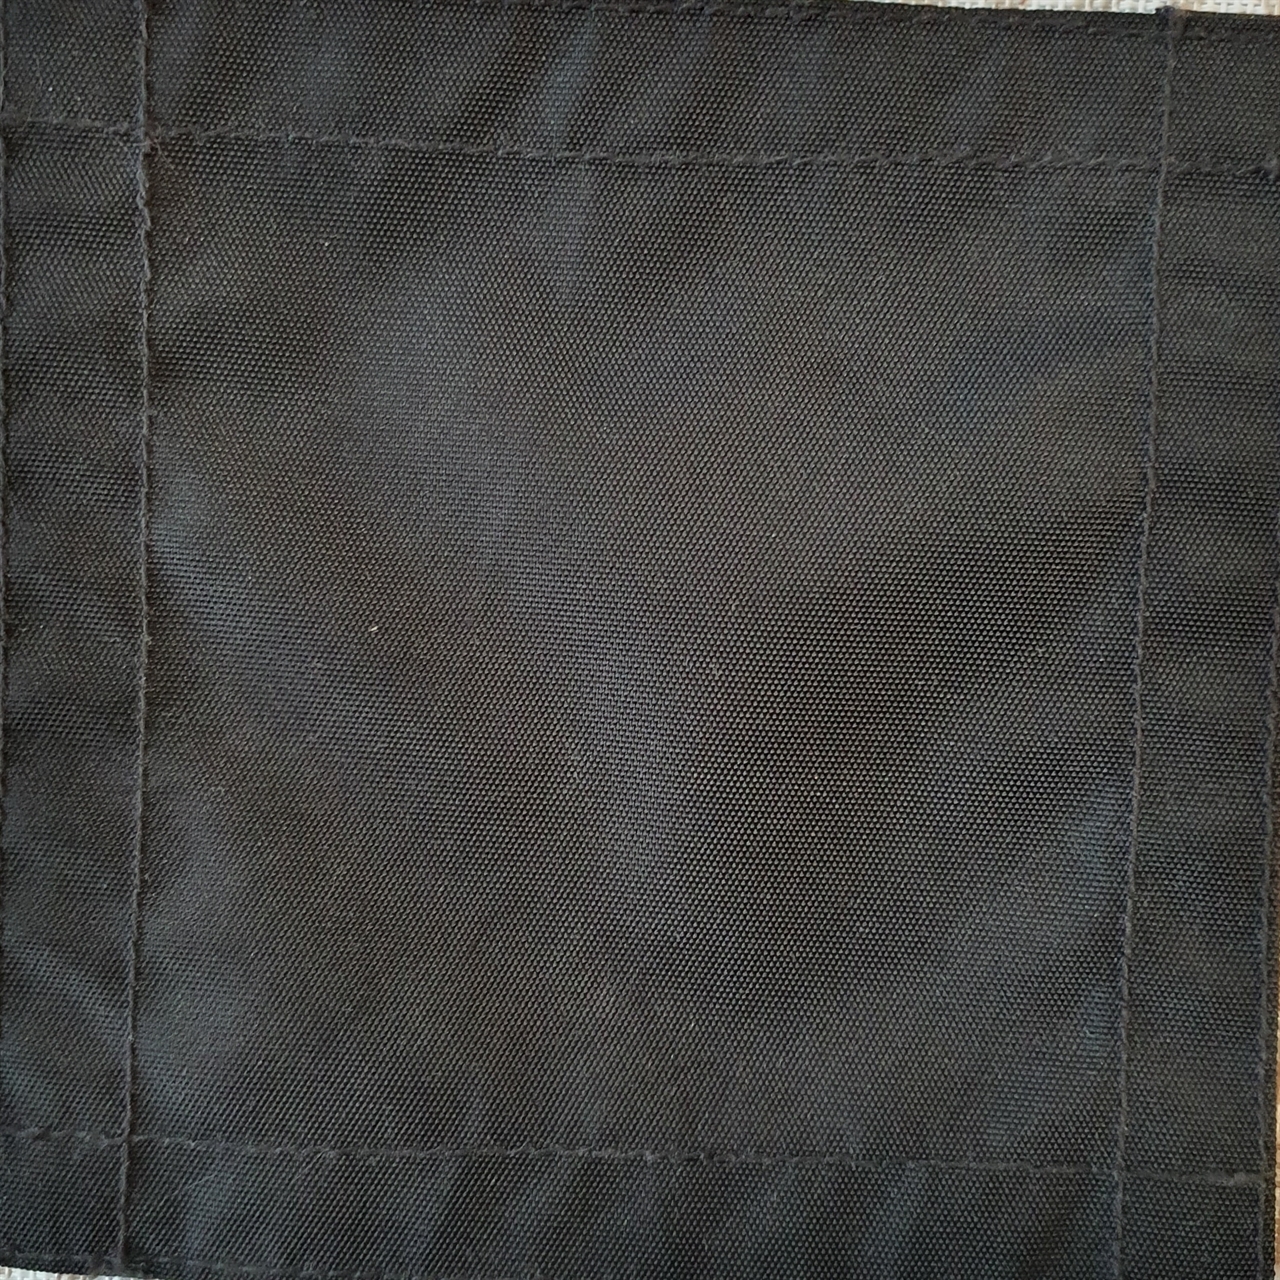 Picture of Warrior Velcro Patches front/rear blank